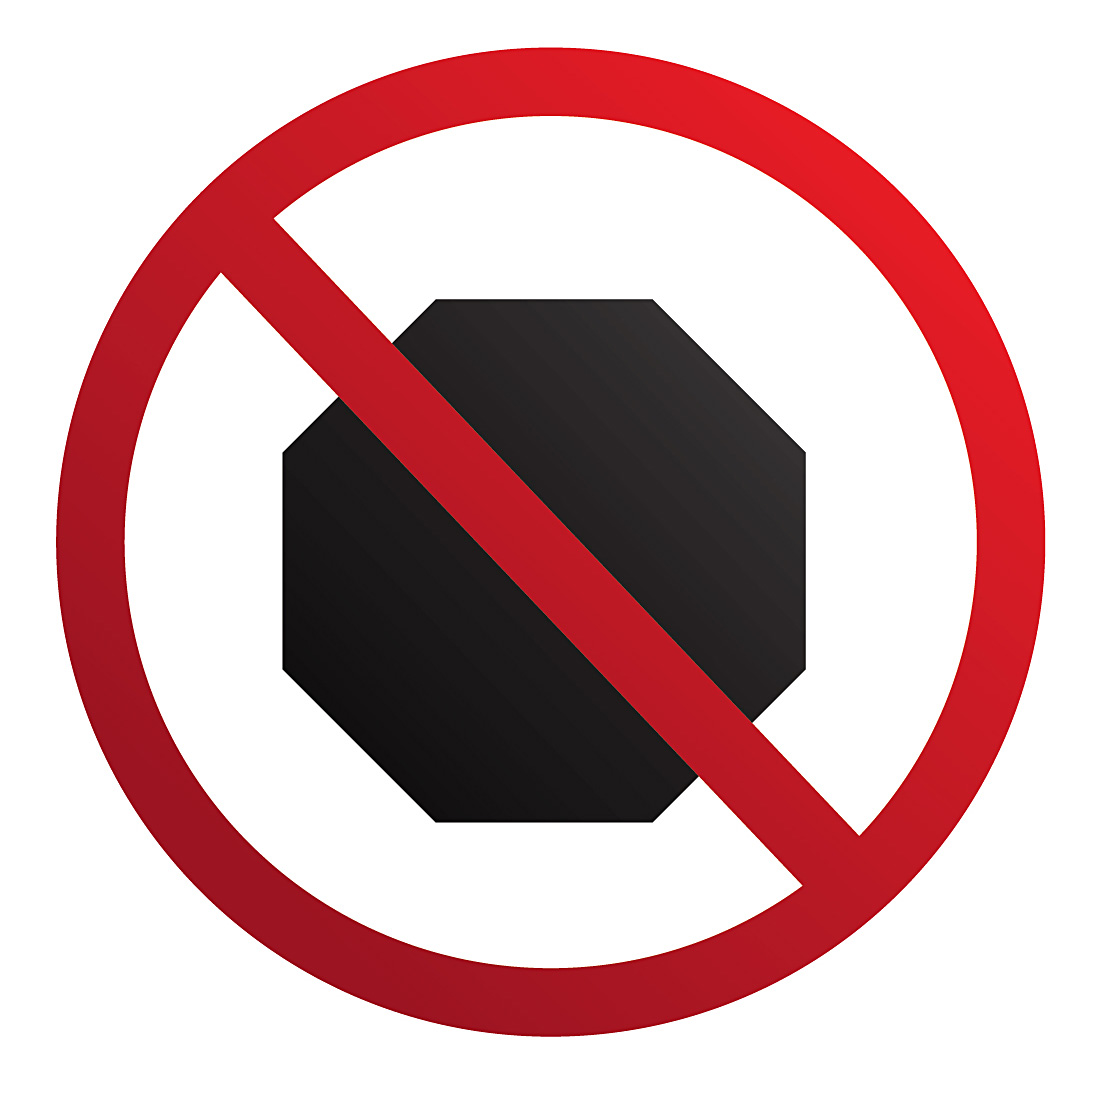 Black hexagon encircled by a prohibited symbol.